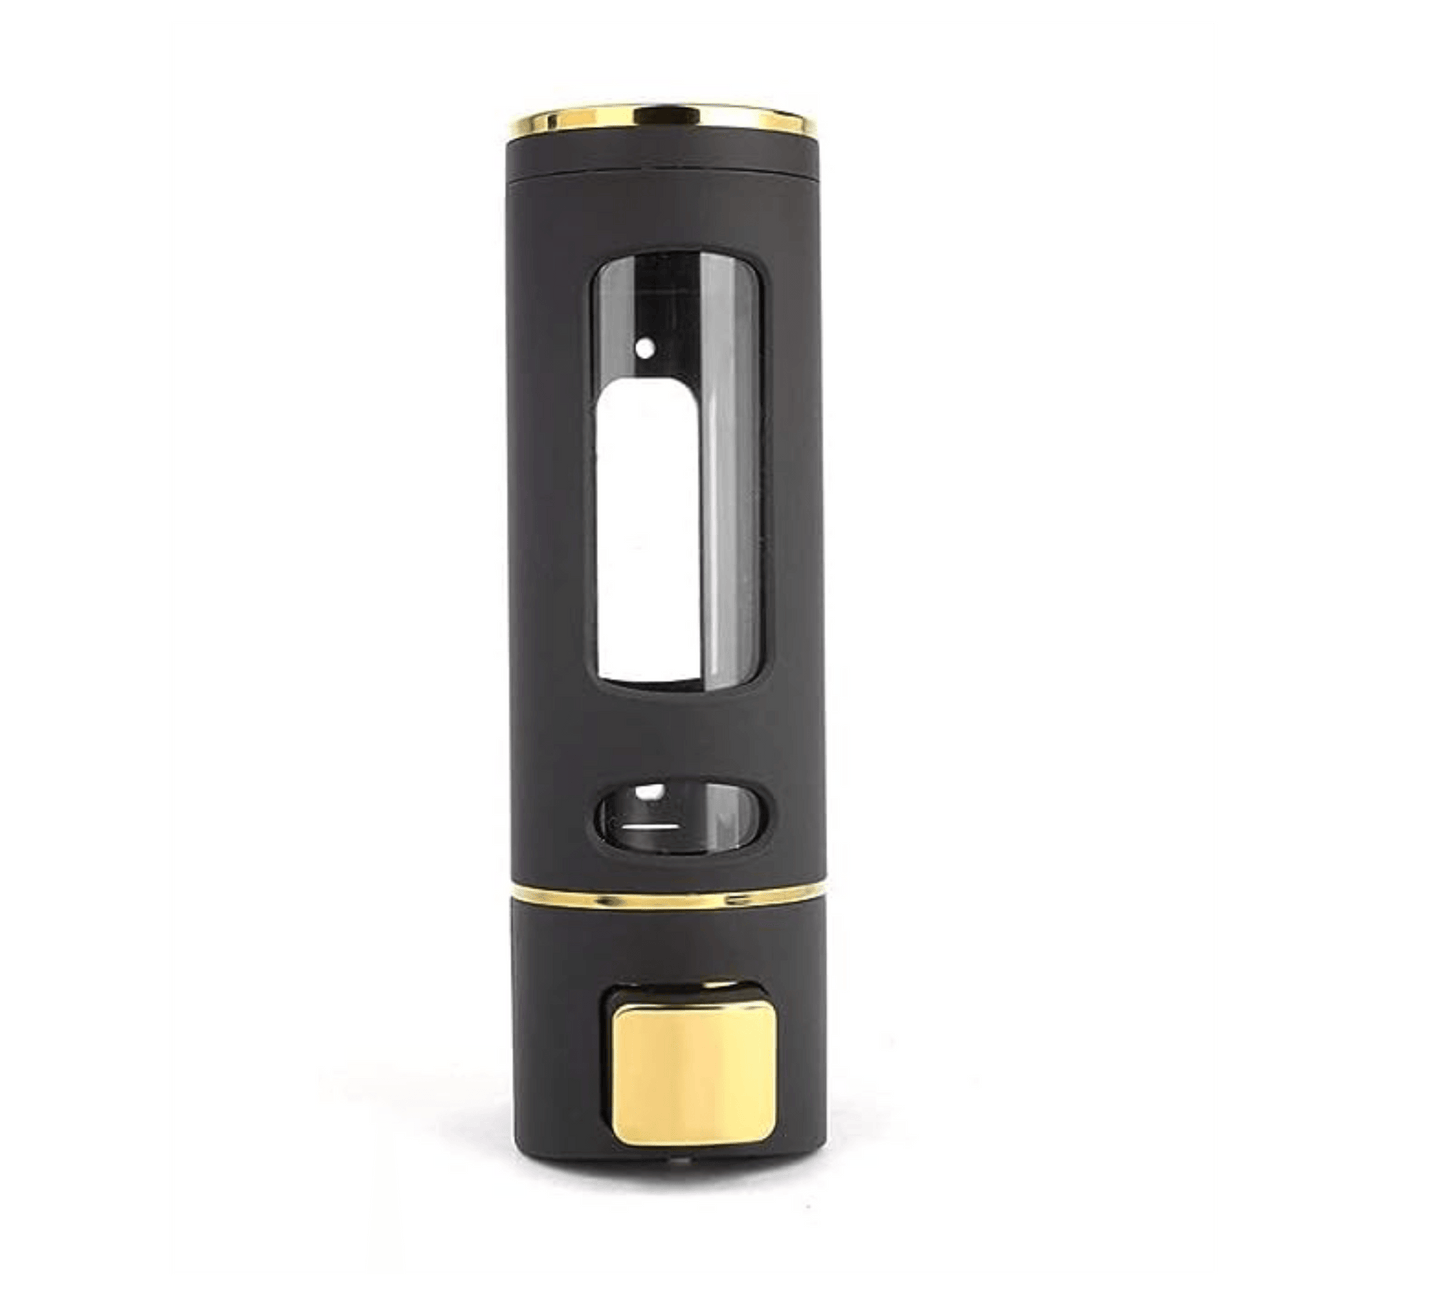 Fossa Wall-Mount Soap Dispensers 400ML Manual Soap Bathroom for Hair Shampoo Shower or Hand Cleanser Black Gold - Fossa Home 